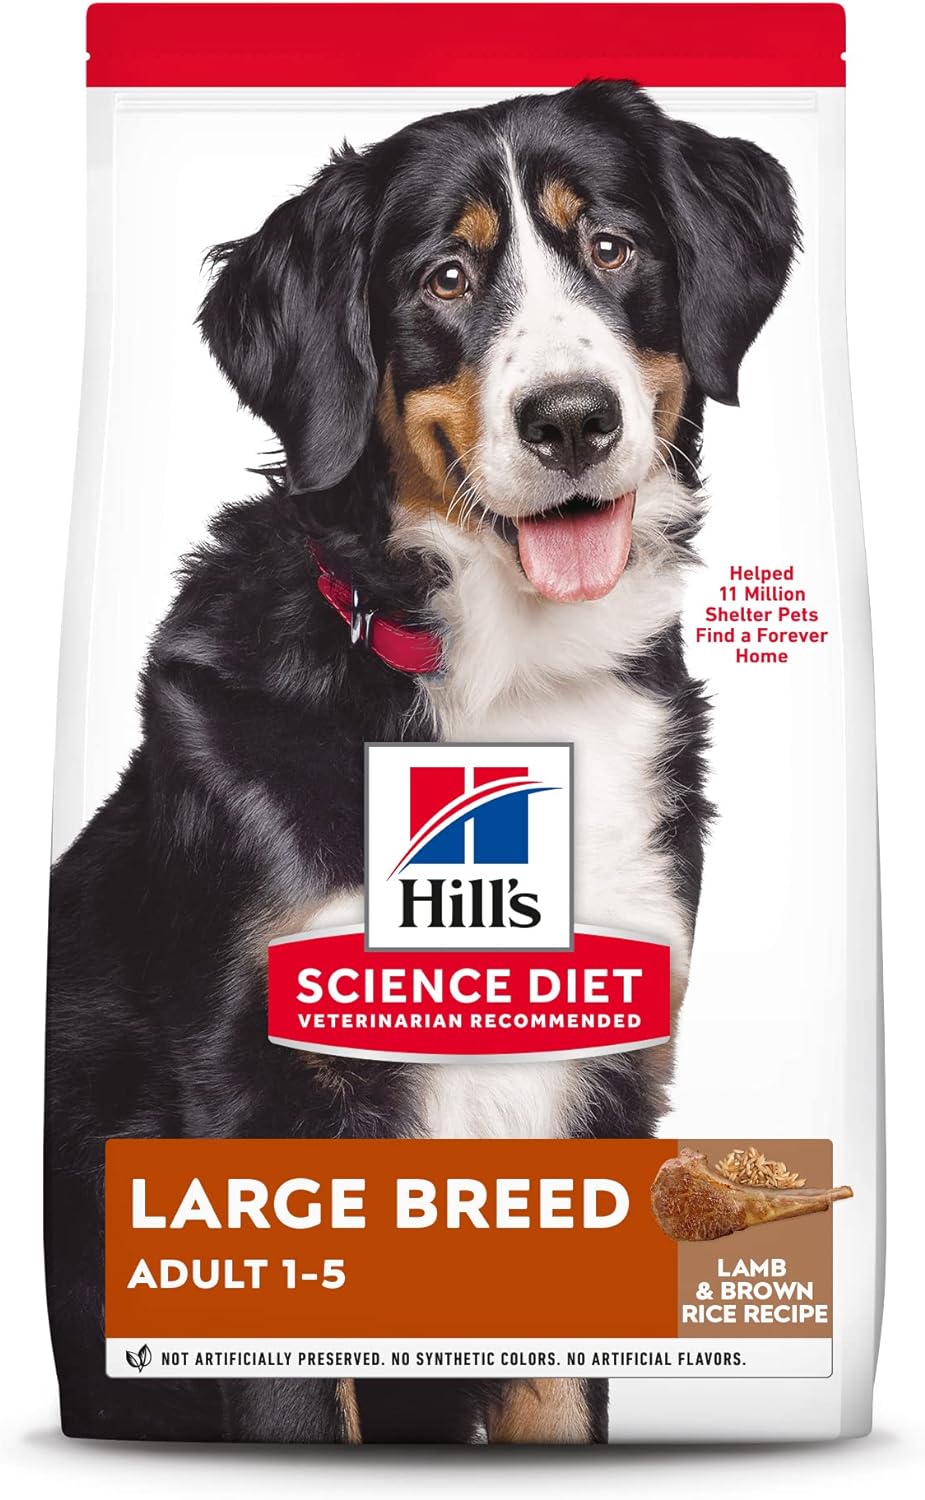 Hill’s Science Diet Adult Large Breed Lamb Meal & Brown Rice Recipe Dry Dog Food – Gallery Image 1